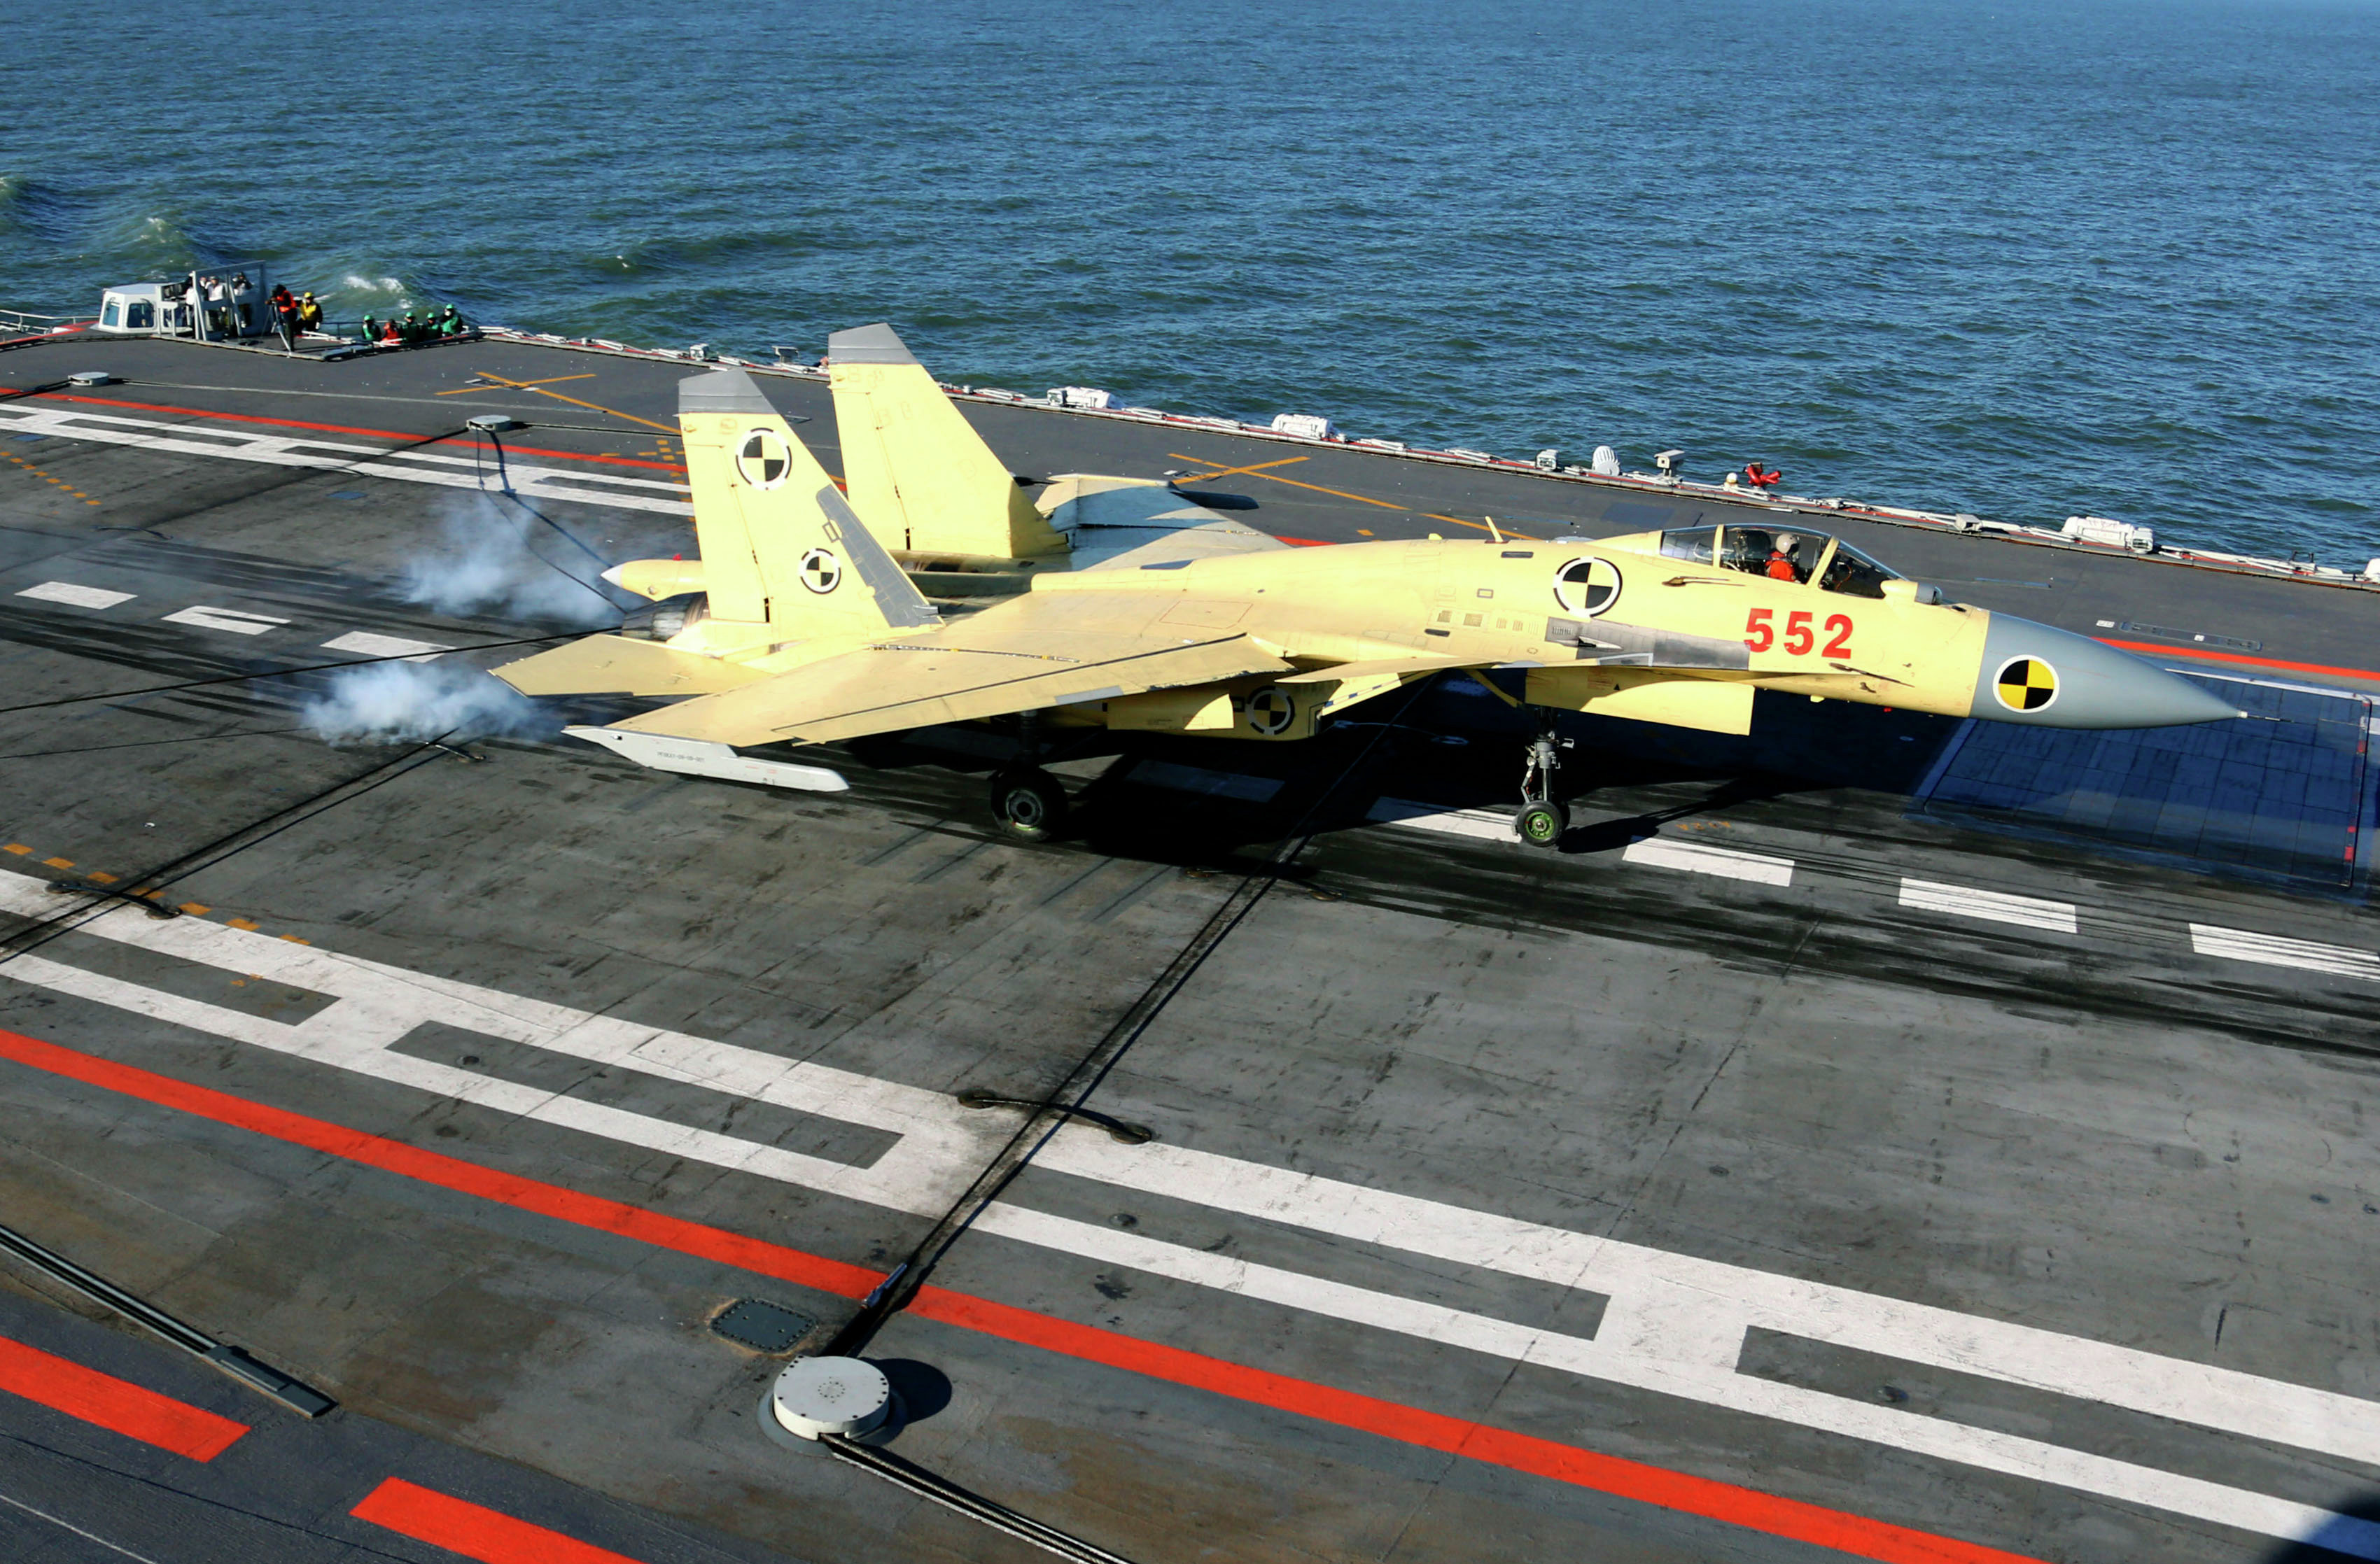 Amazing Chinese Aircraft Carrier Liaoning Pictures & Backgrounds